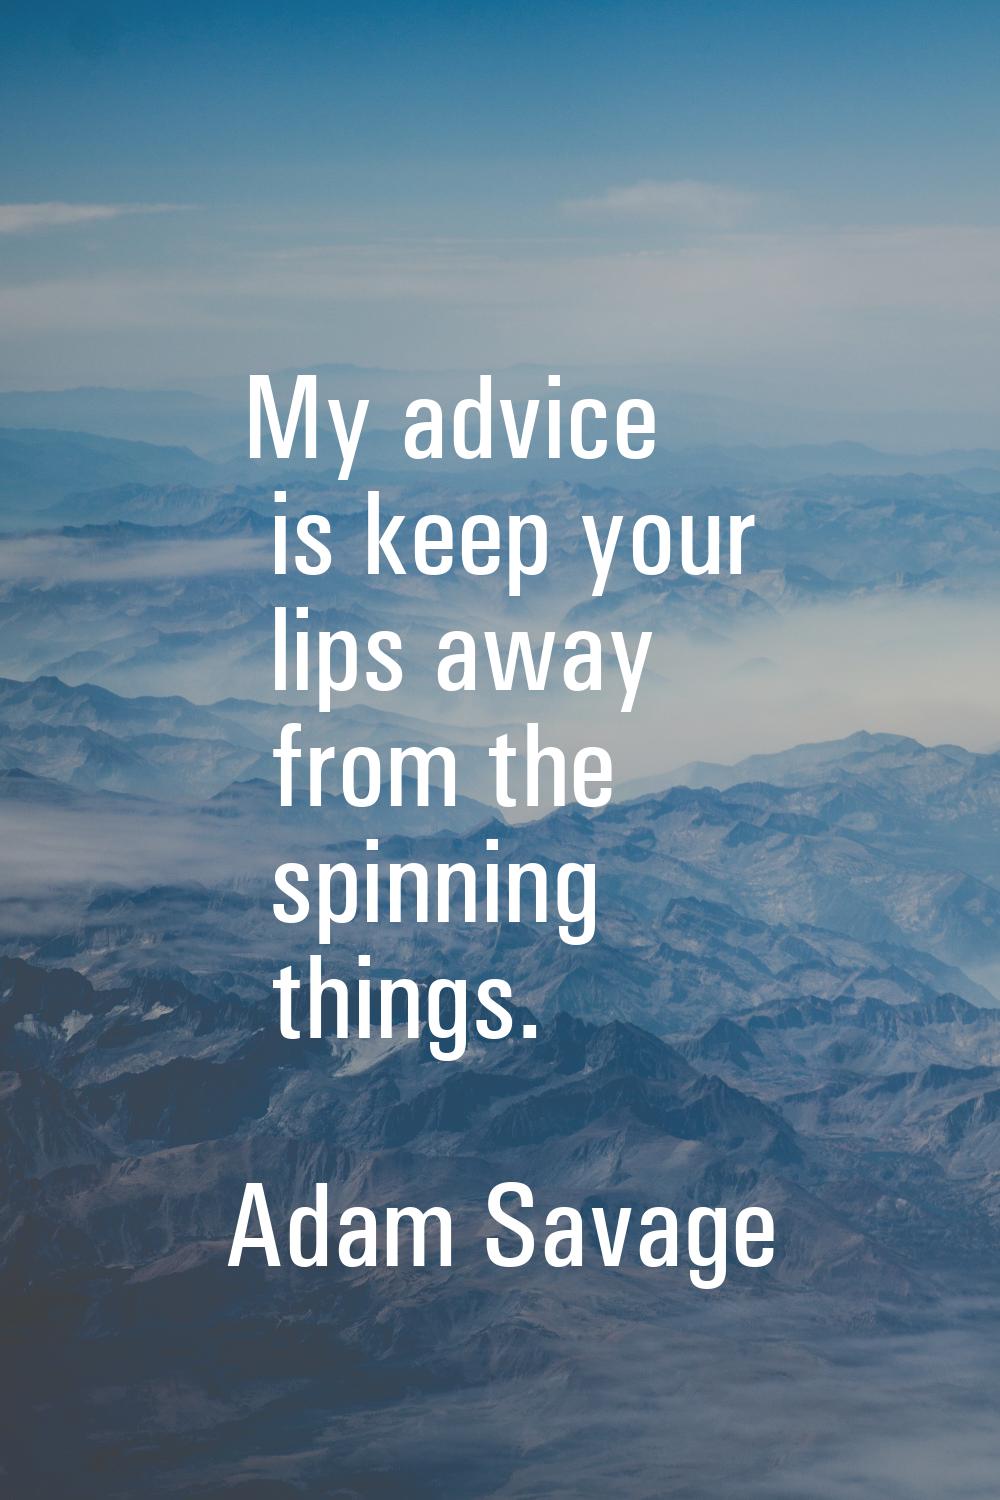 My advice is keep your lips away from the spinning things.